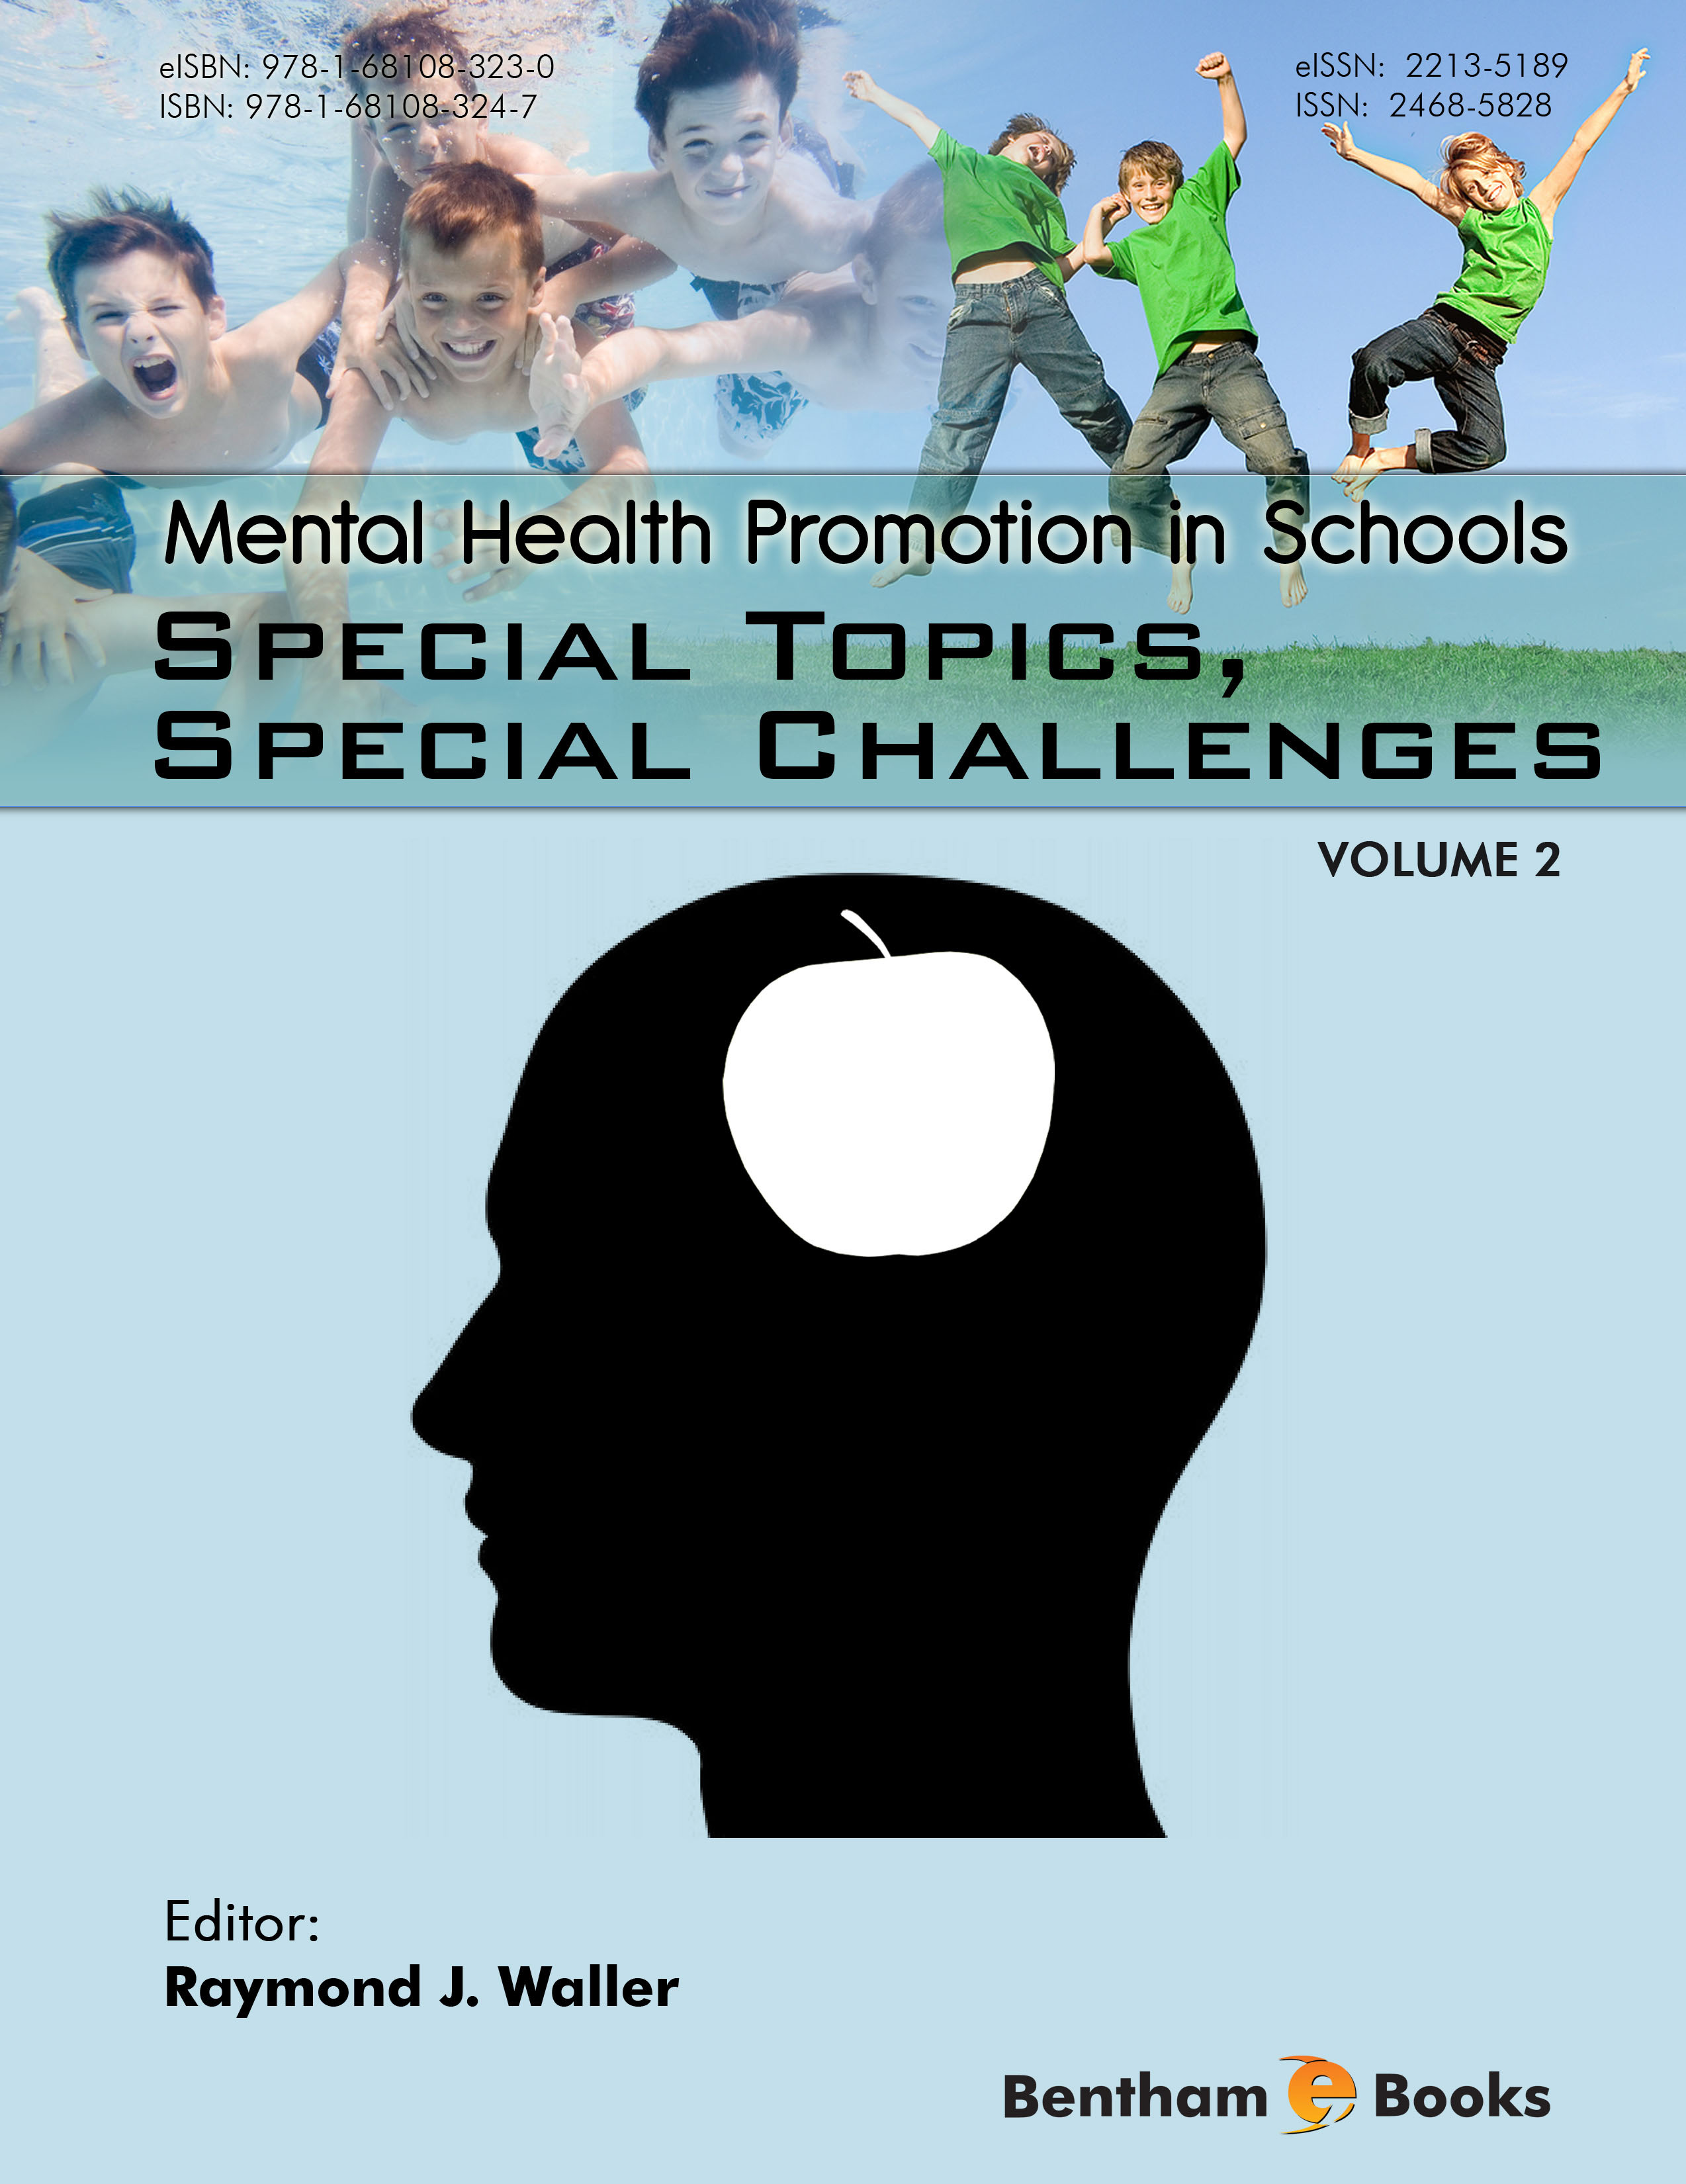 Special Topics, Special Challenges